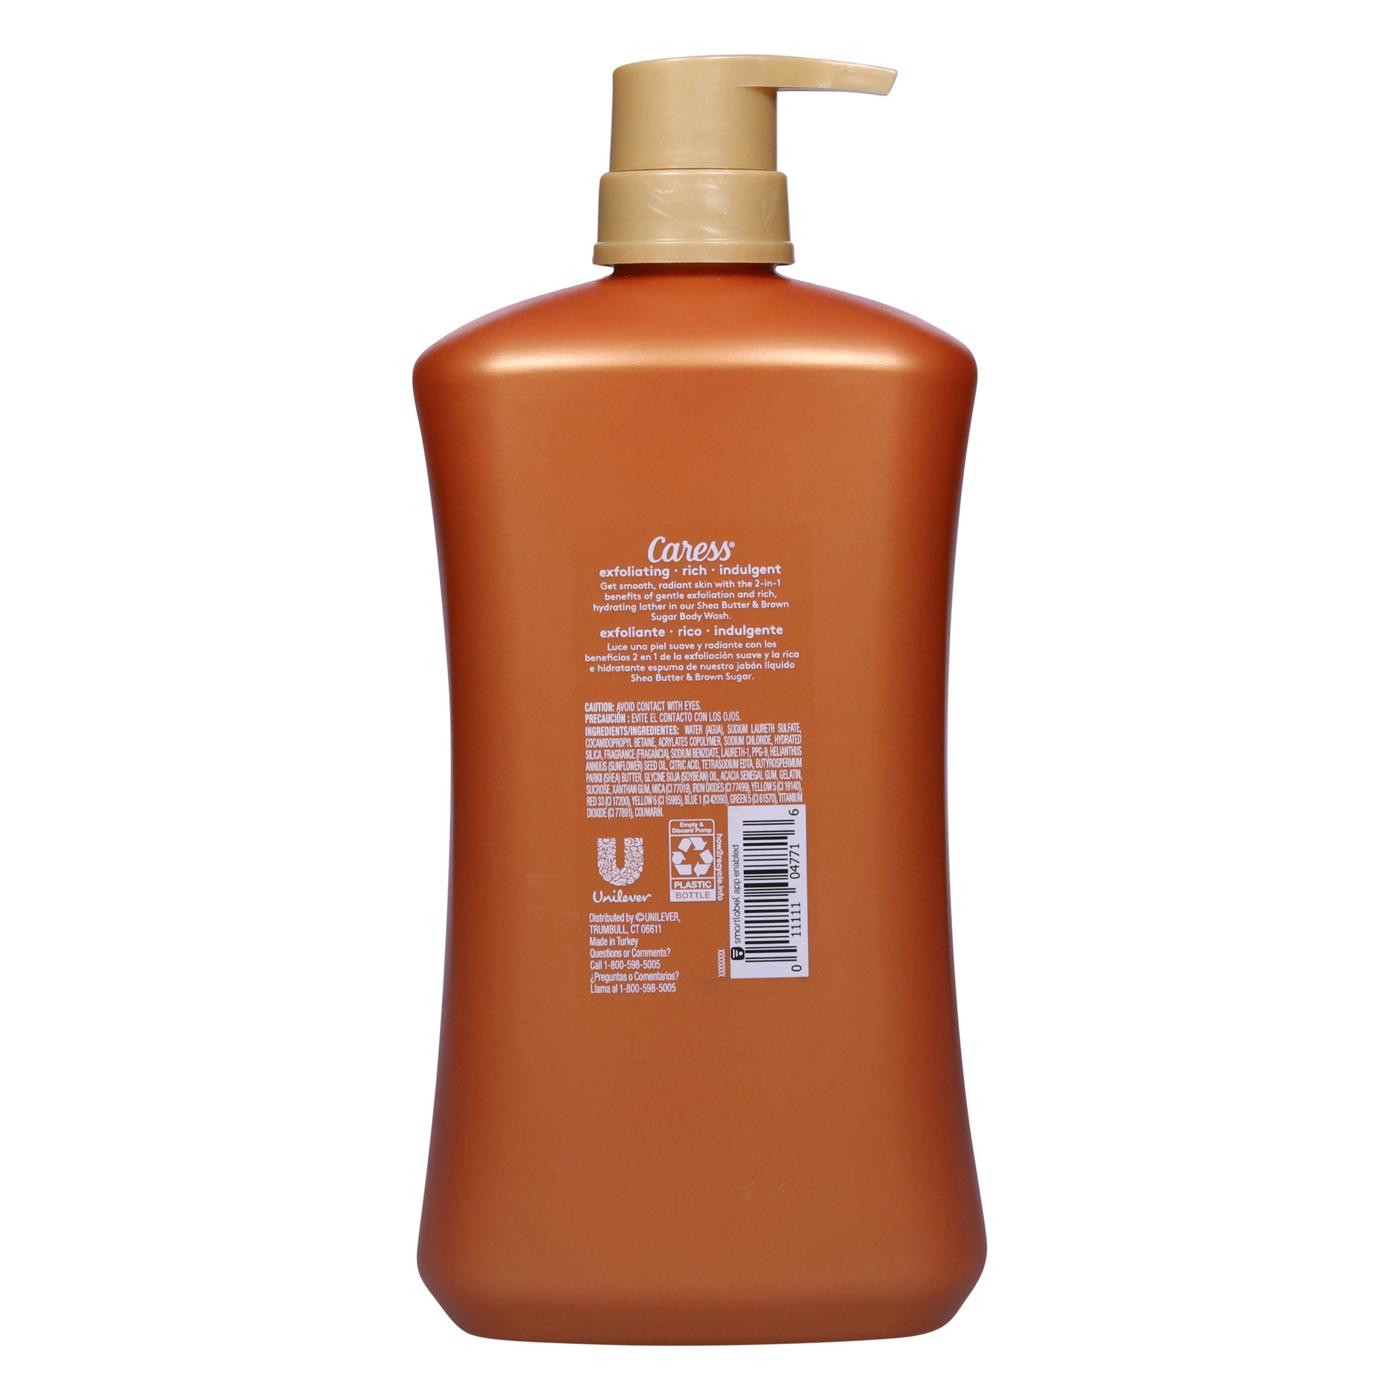 Caress Exfoliating Body Wash - Shea Butter and Brown Sugar; image 2 of 2